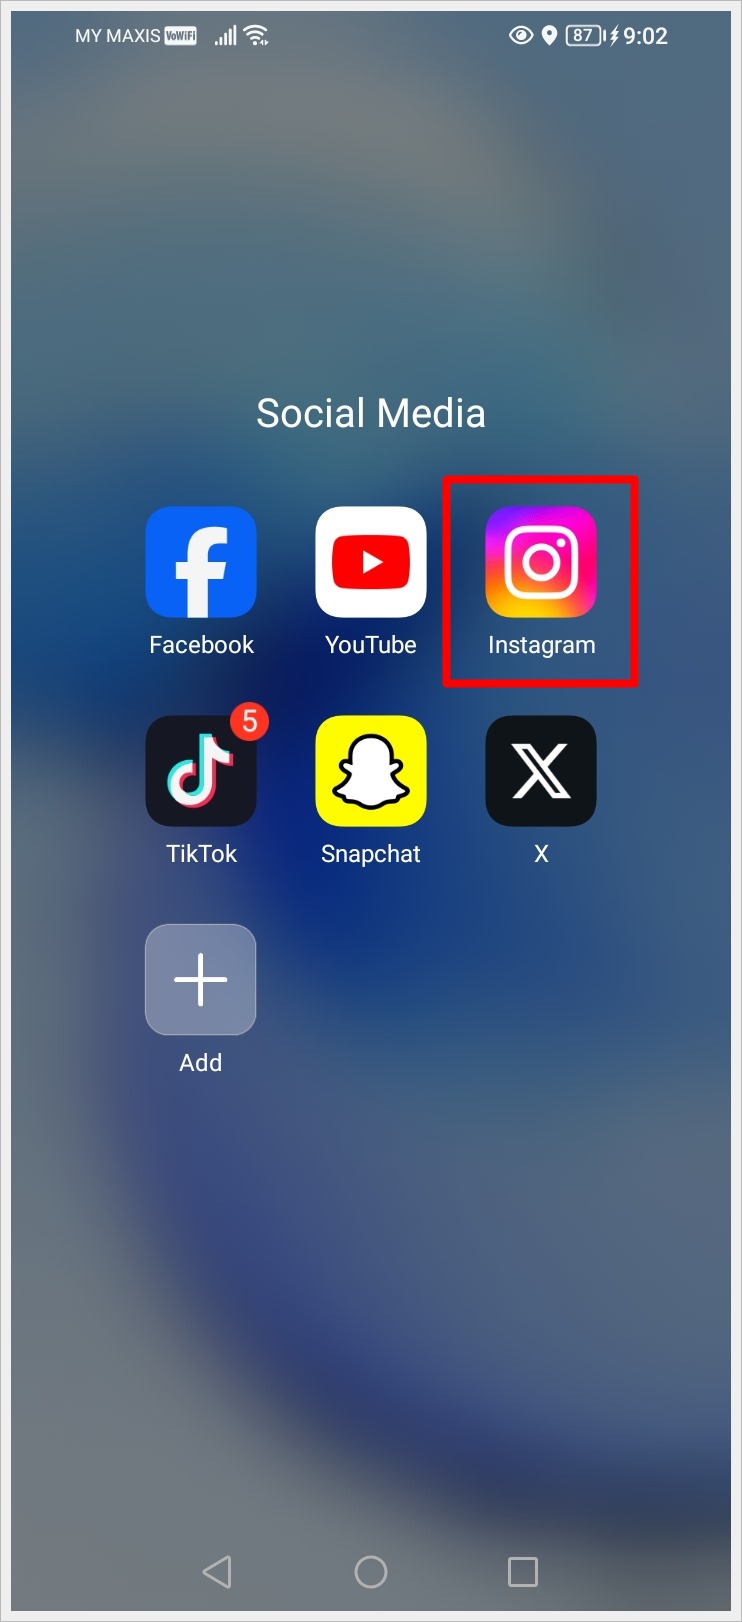 This image shows a screenshot of an Android phone with the Instagram app icon highlighted.